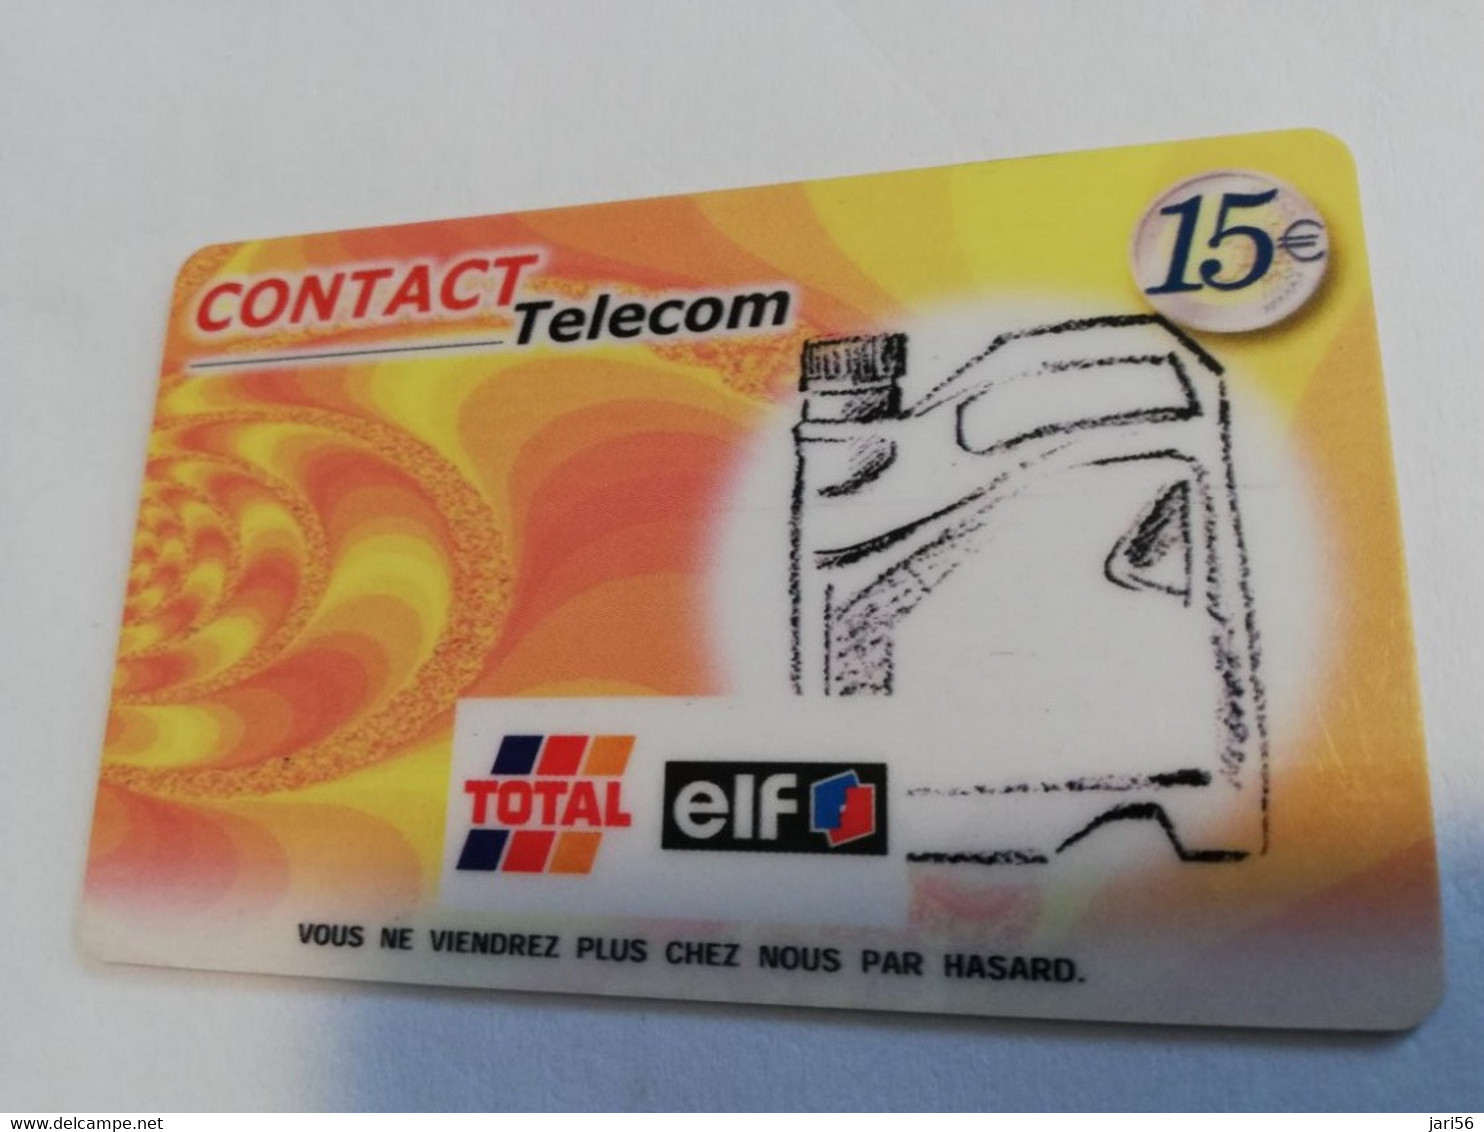 ST MARTIN FRENCH SIDE 3CARDS  SERIE € 5,-+ € 10,-+ € 15,-  GAS STATION TOTAL/ELF   CONTACT TELECOM    **6579 ** - Antilles (French)